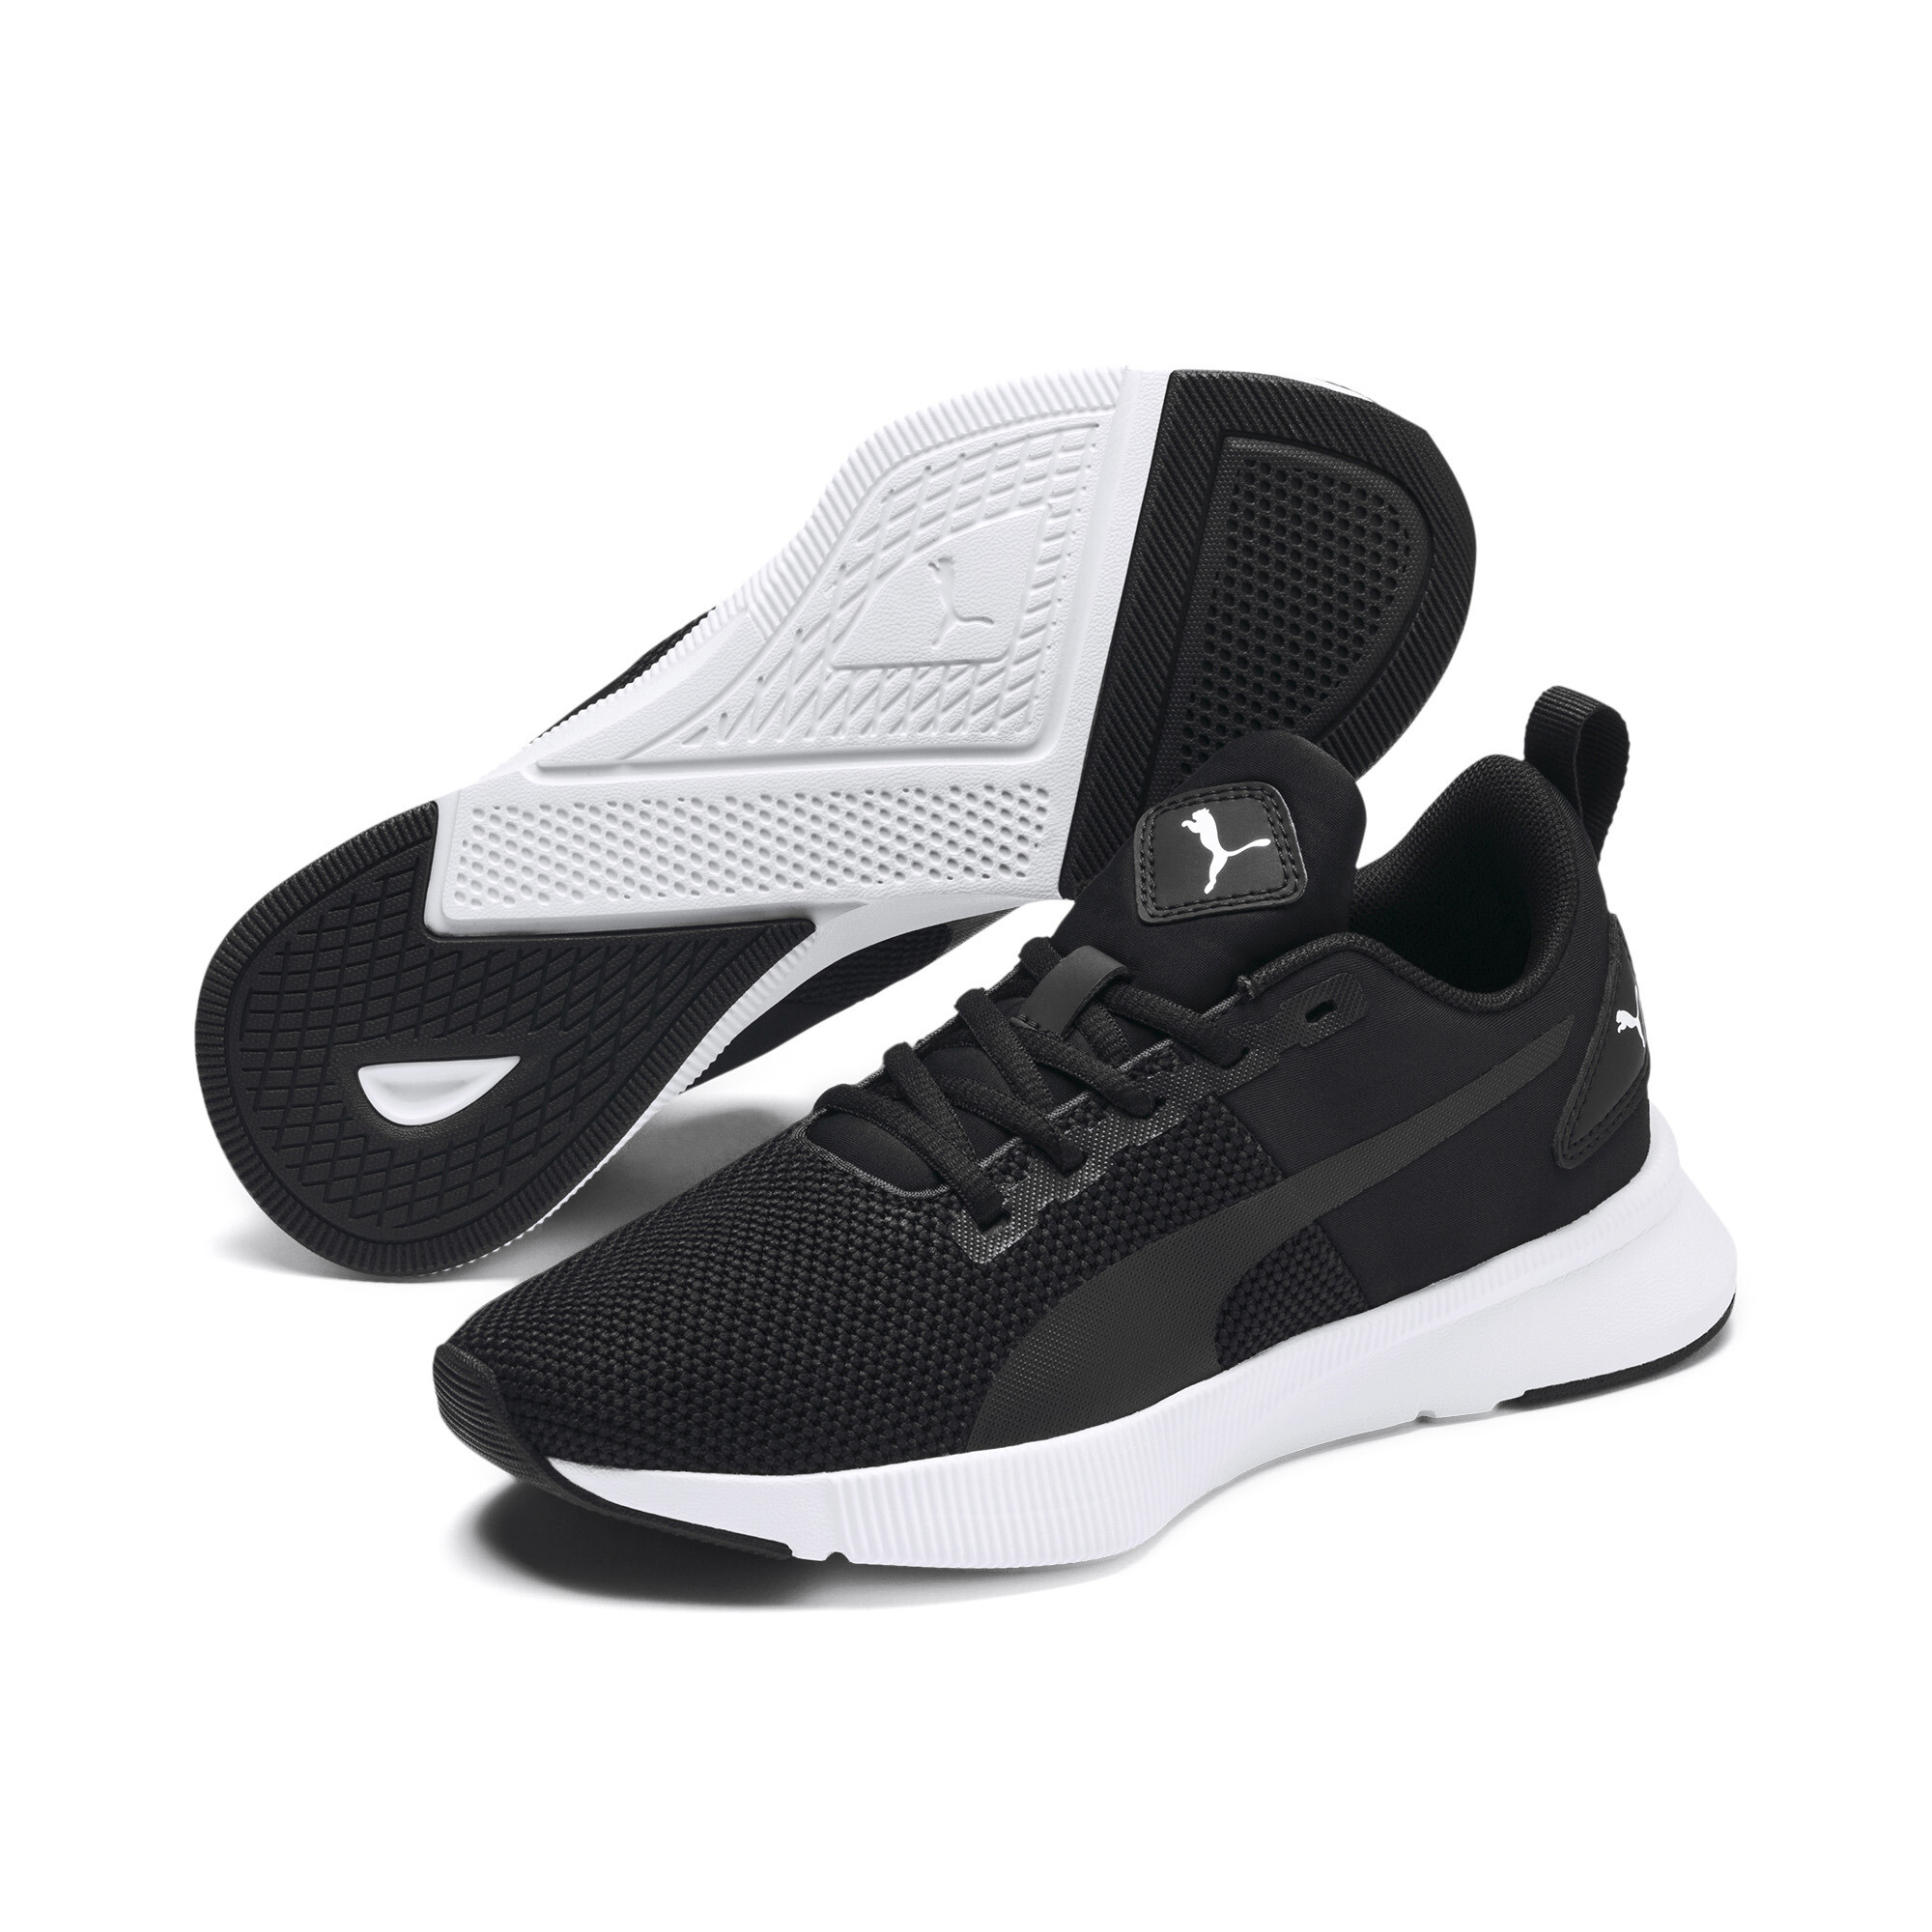 PUMA Flyer Runner Youth Trainers In 10 - Black, Size EU 37.5